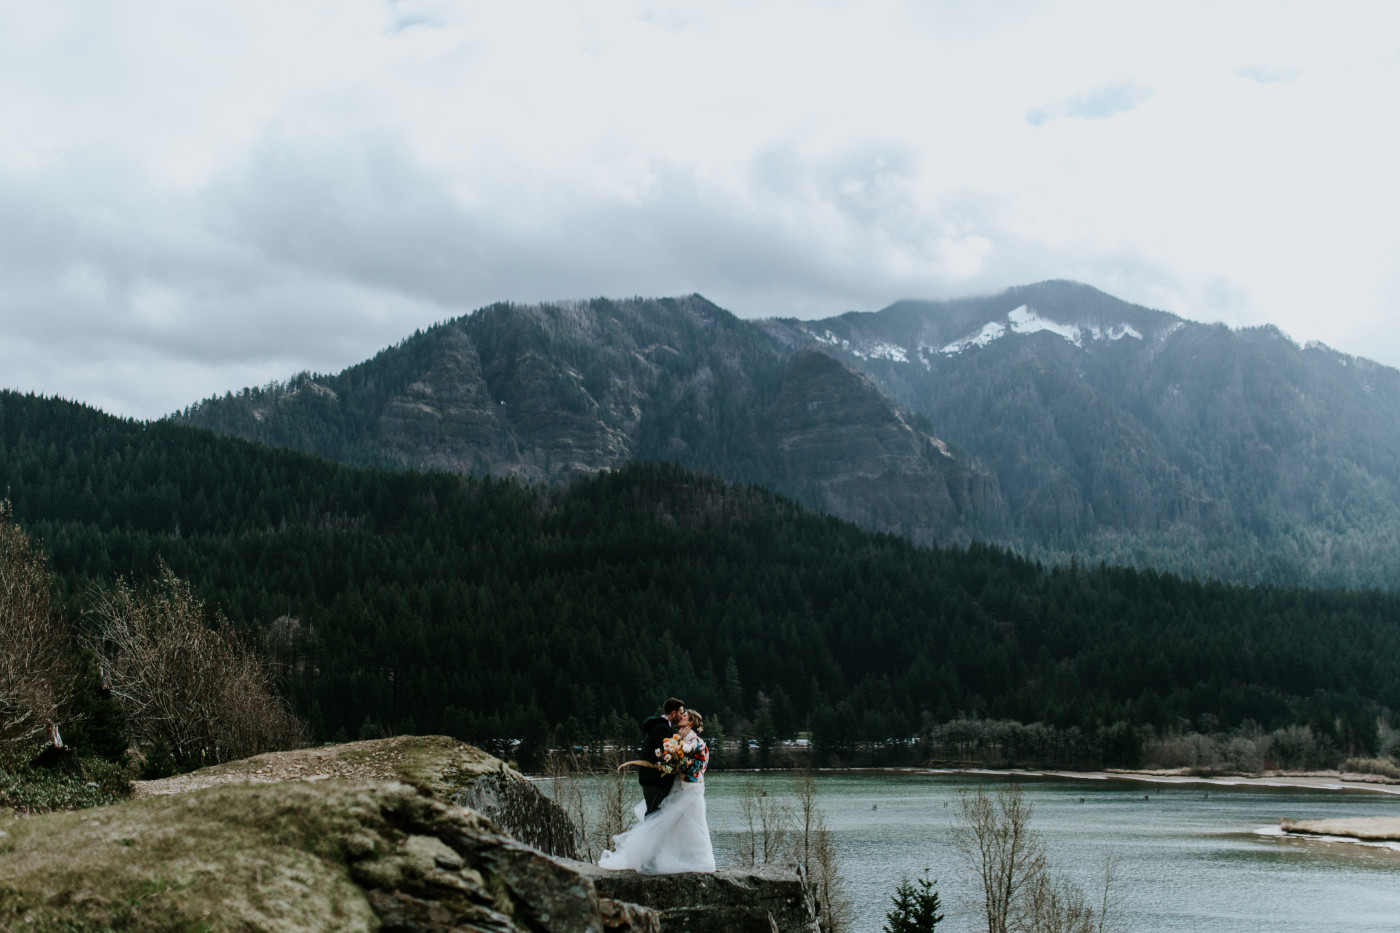 Allison and Lennie kiss. Elopement photography at Columbia River Gorge by Sienna Plus Josh.